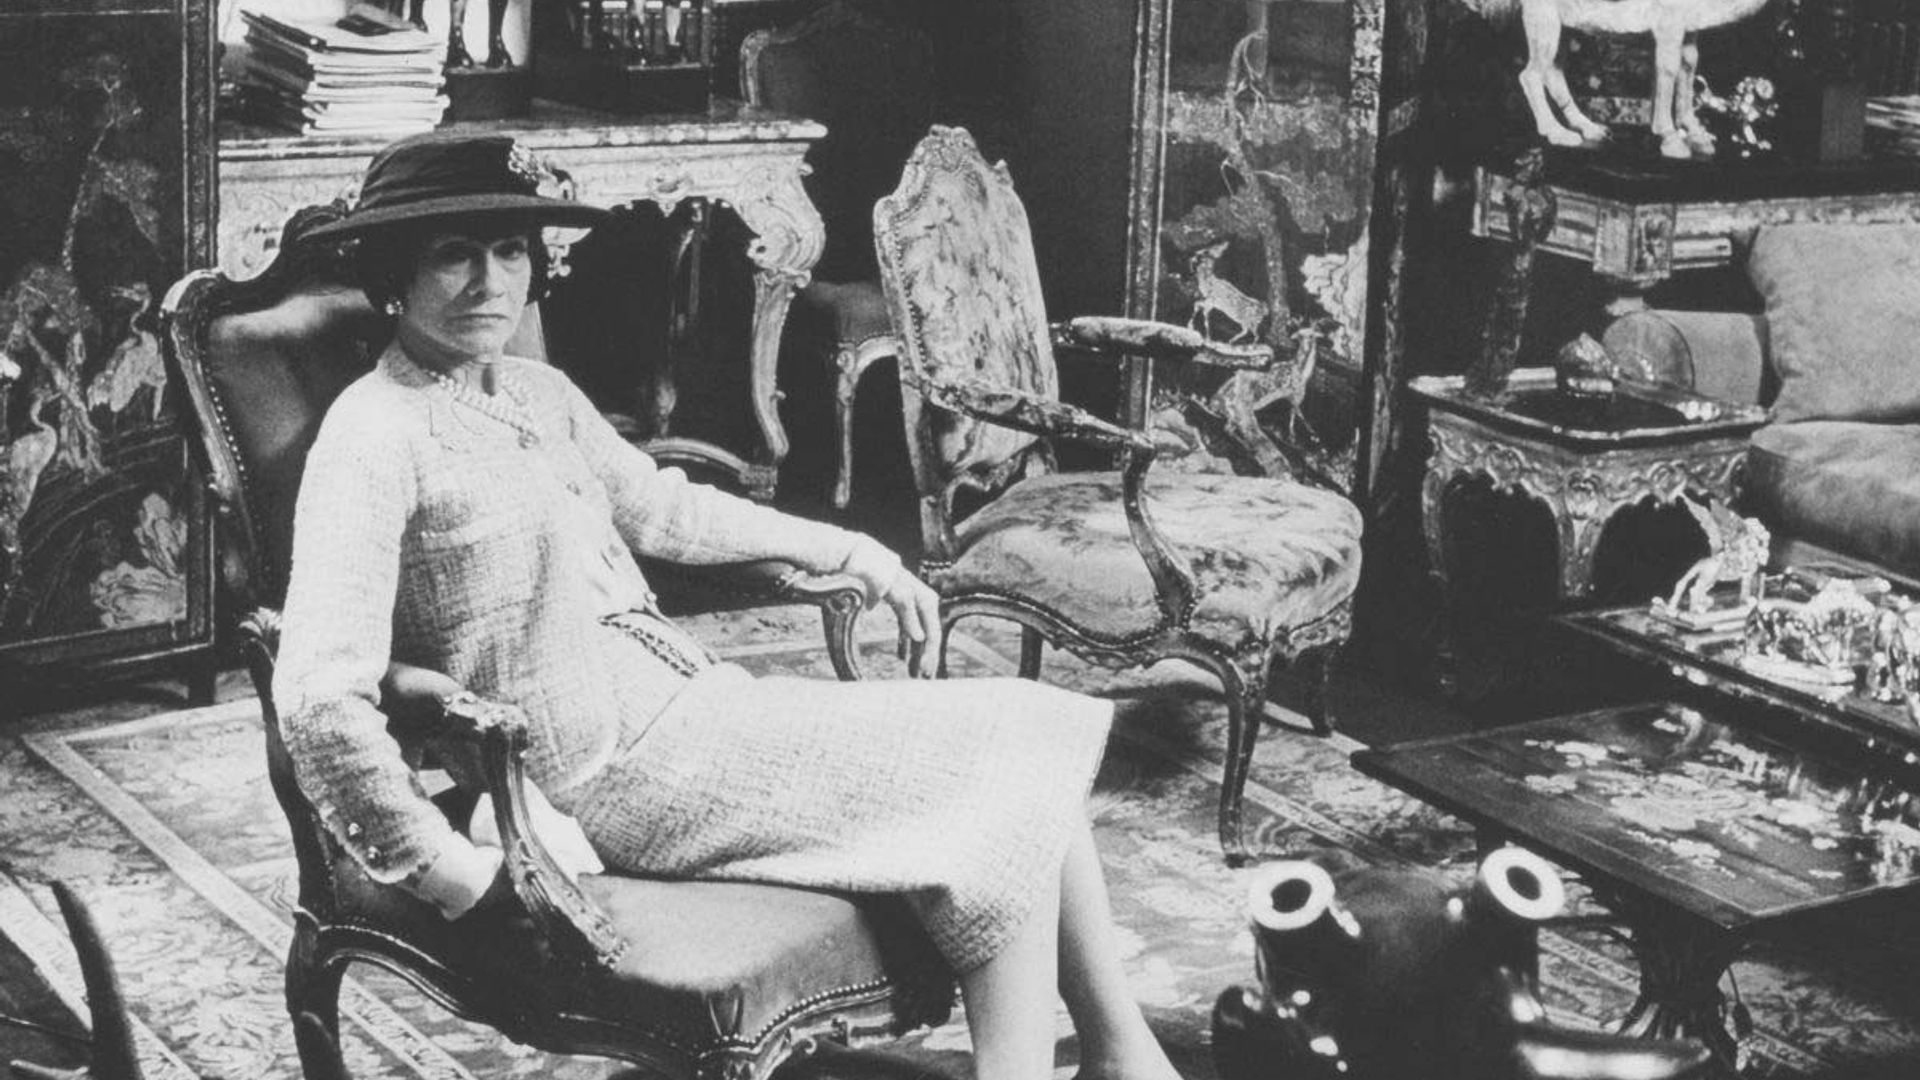 Coco Chanel 9 Facts You Didnt Know About the Chanel Designer  WWD